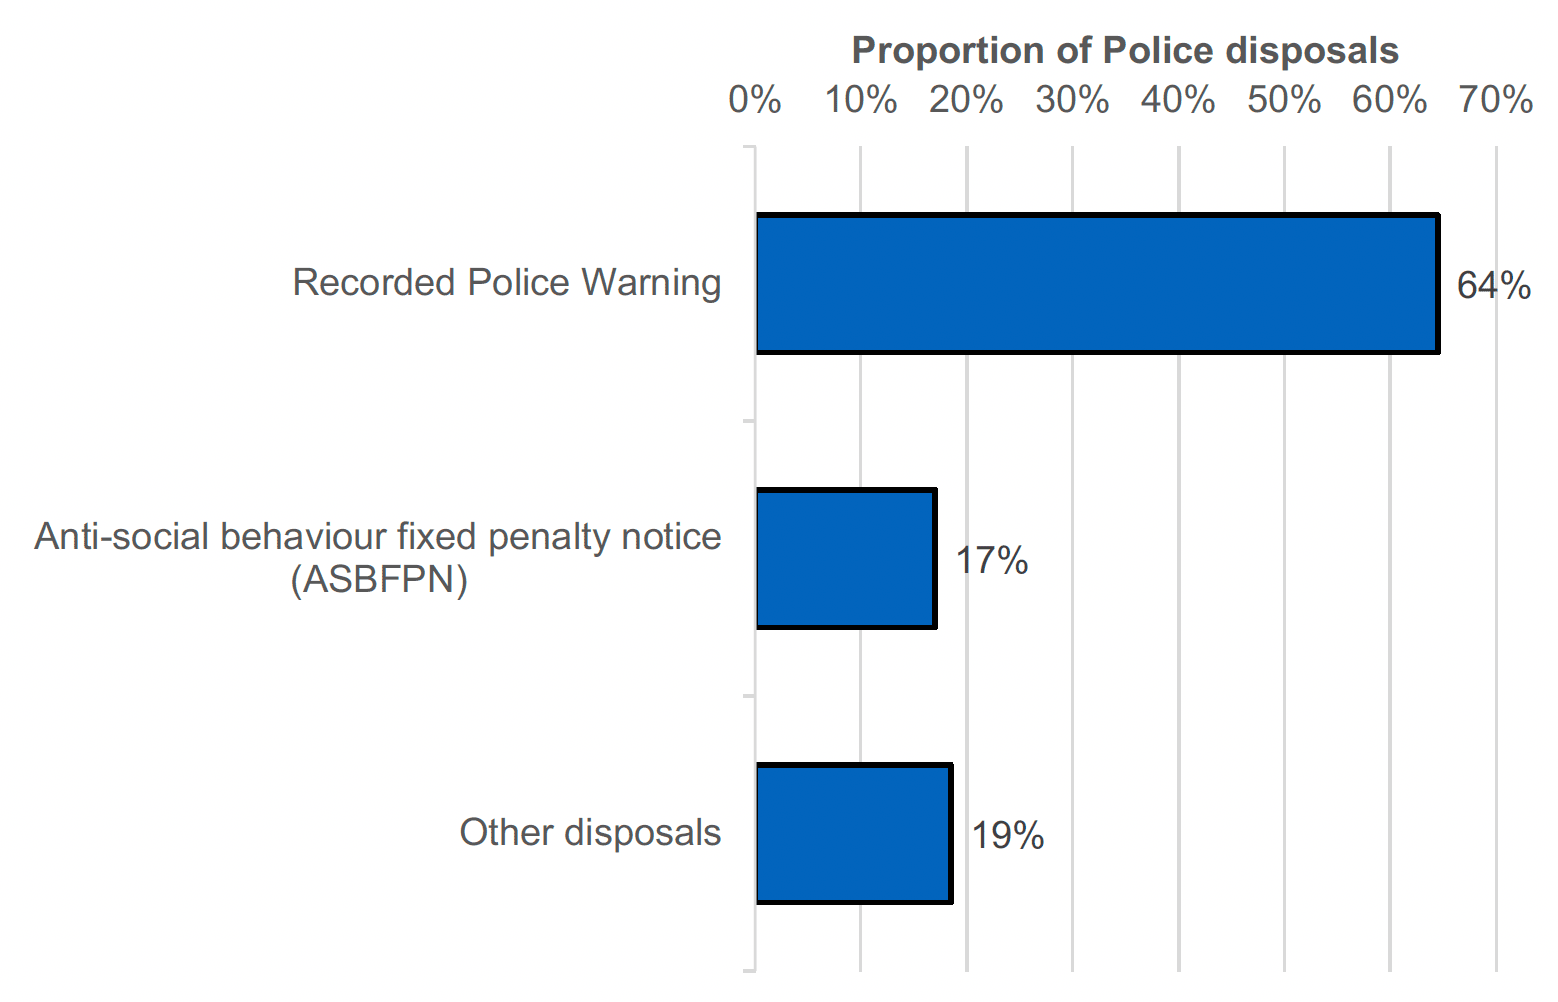 Bar chart showing that Recorded Police Warnings make up the majority (64%) of police disposals in 2021-22.